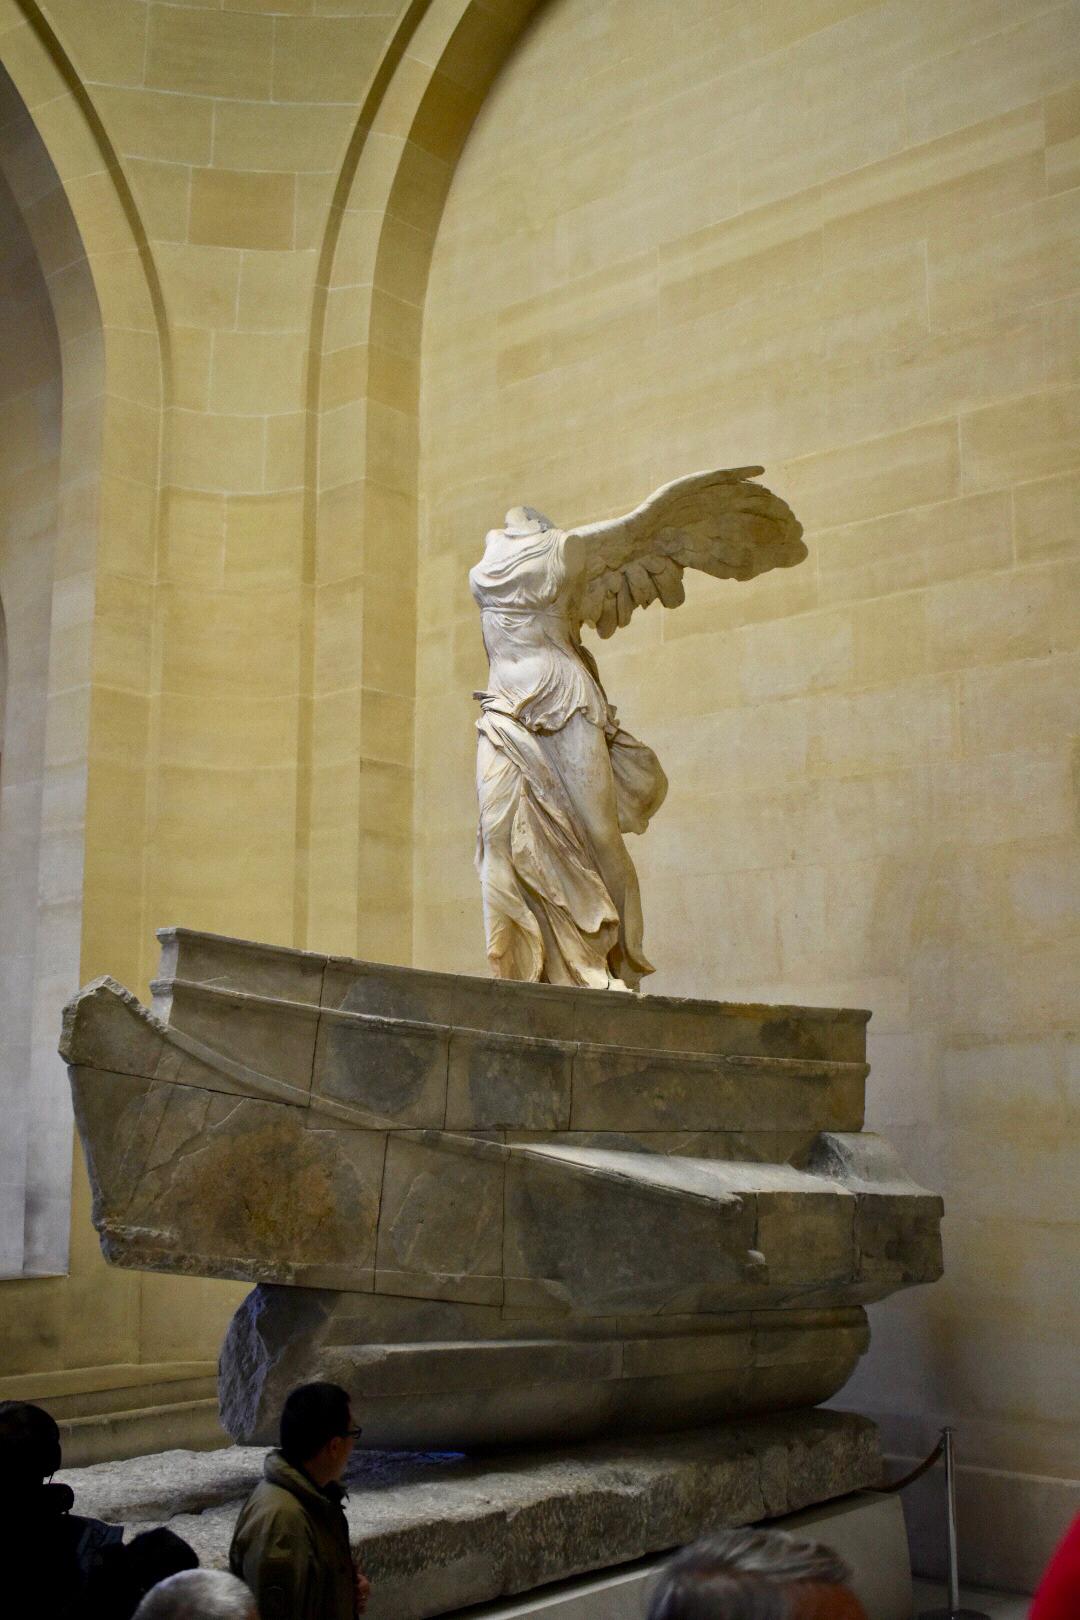 The Winged Victory of Samothrace is one of our favorite works of art.